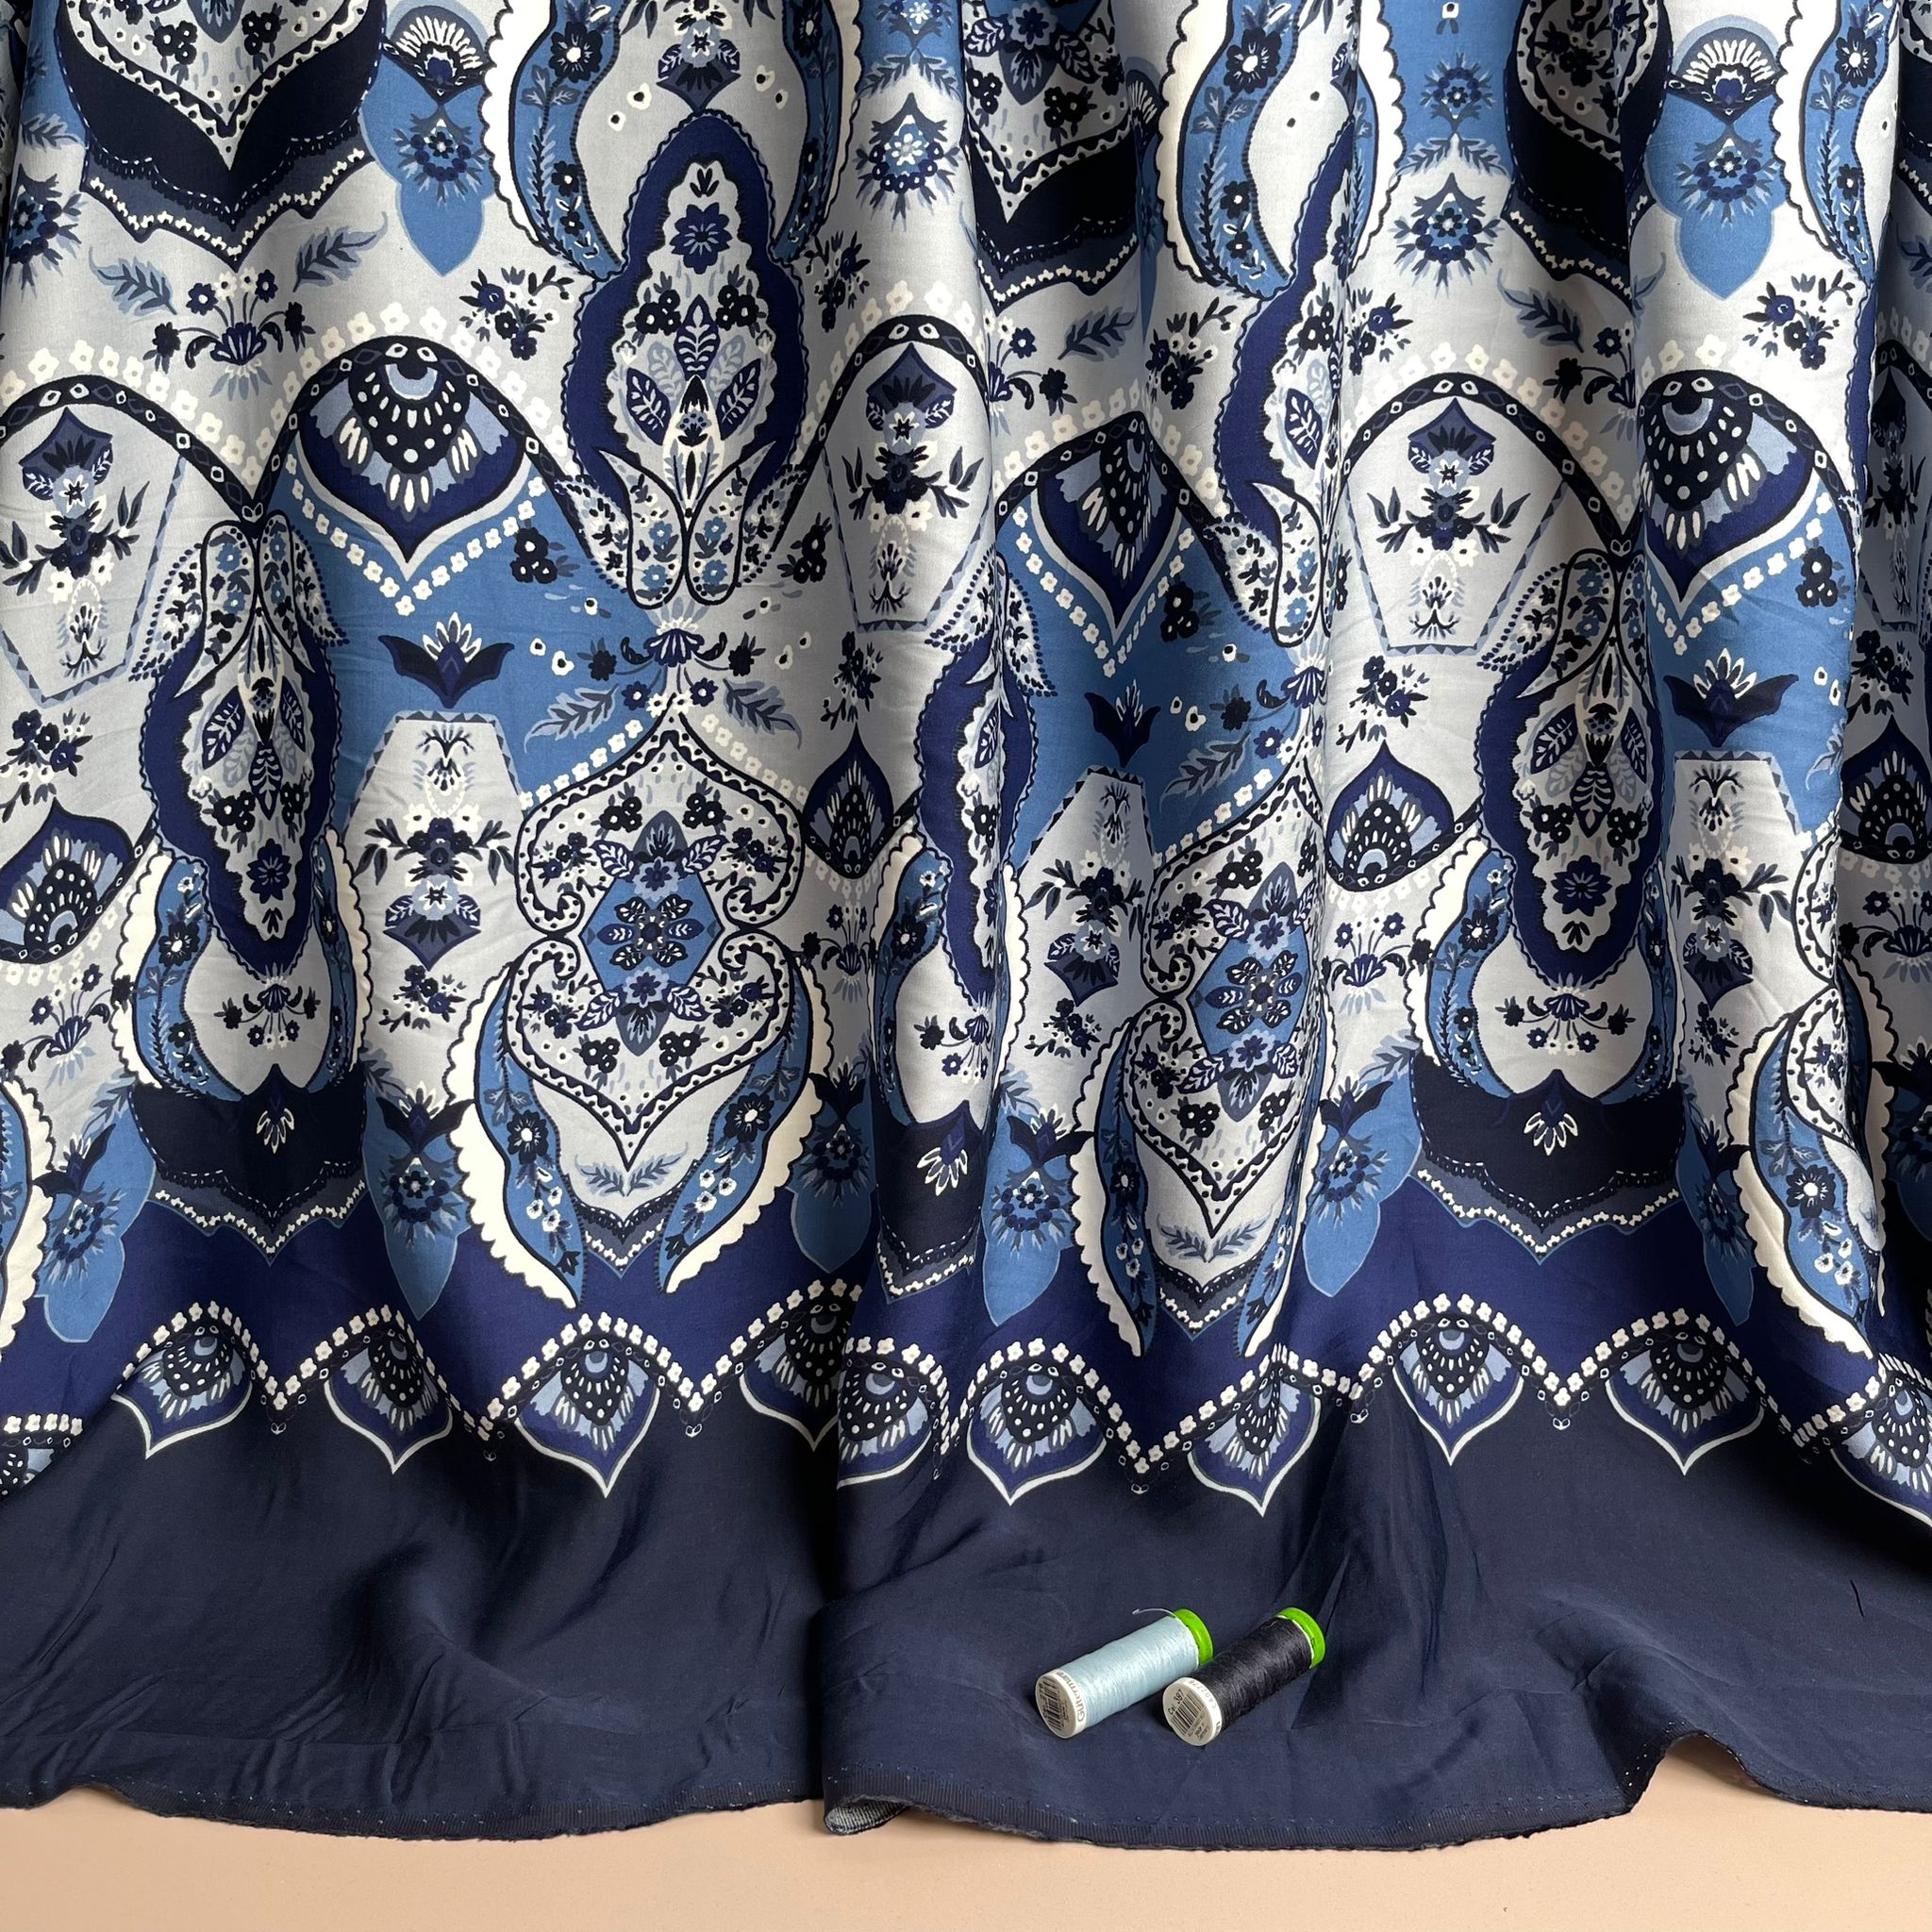 Floral Paisley Border Print in Blue on Navy Viscose Sateen Fabric